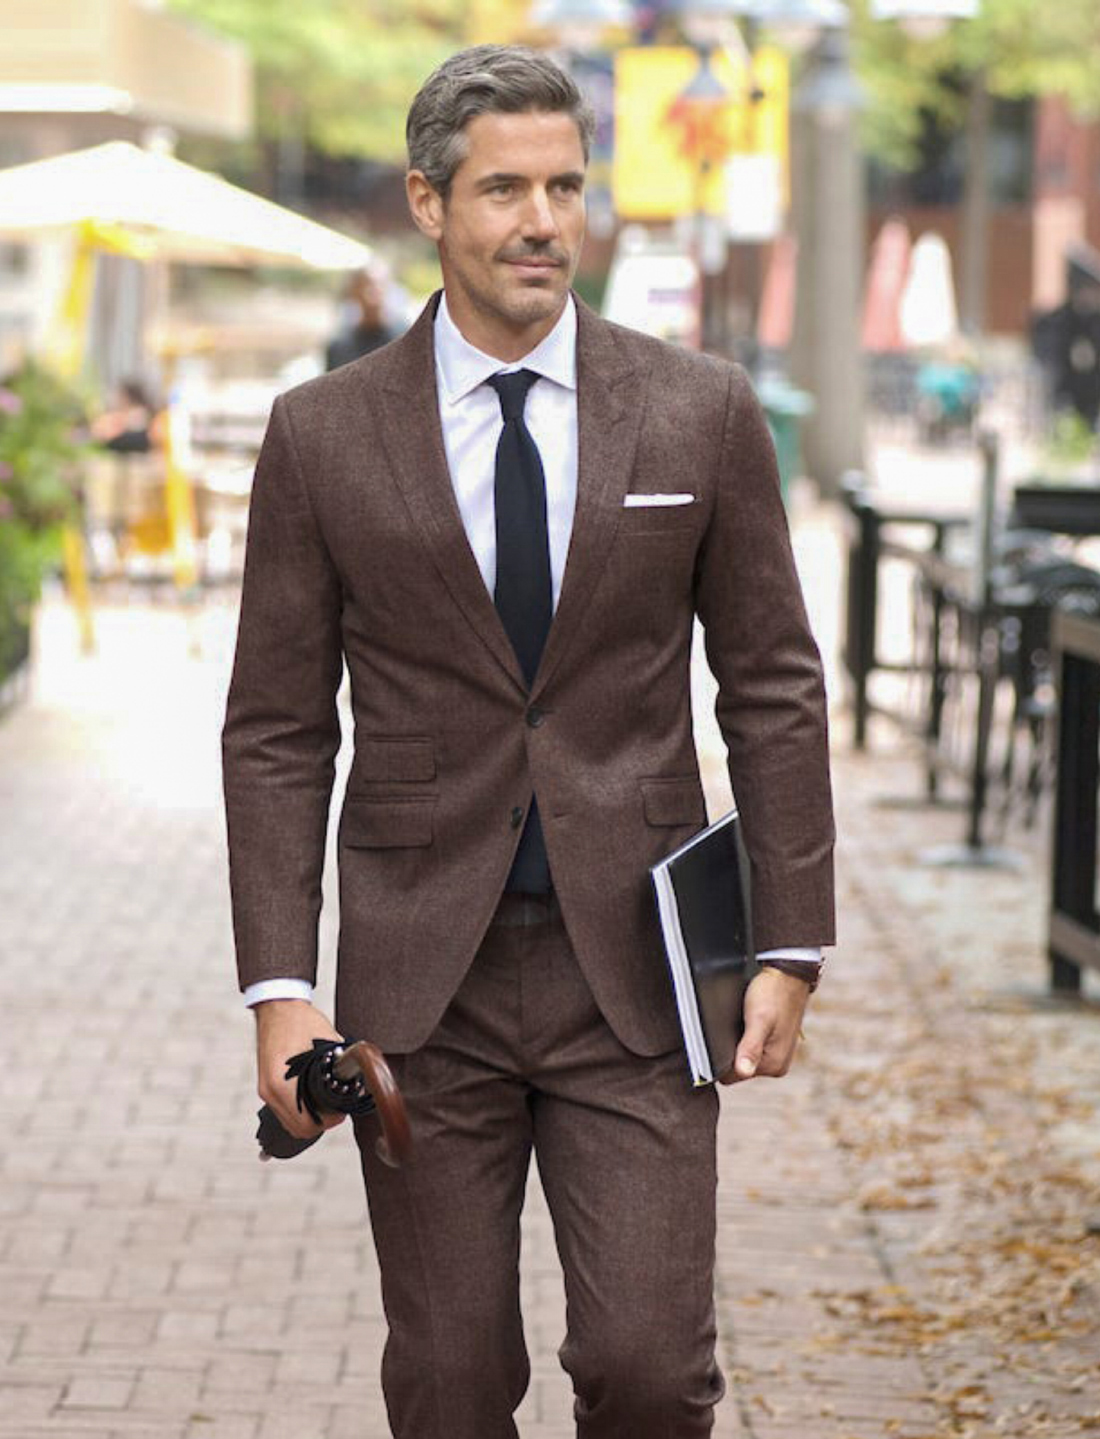 Brown suit, white shirt, and black tie outfit